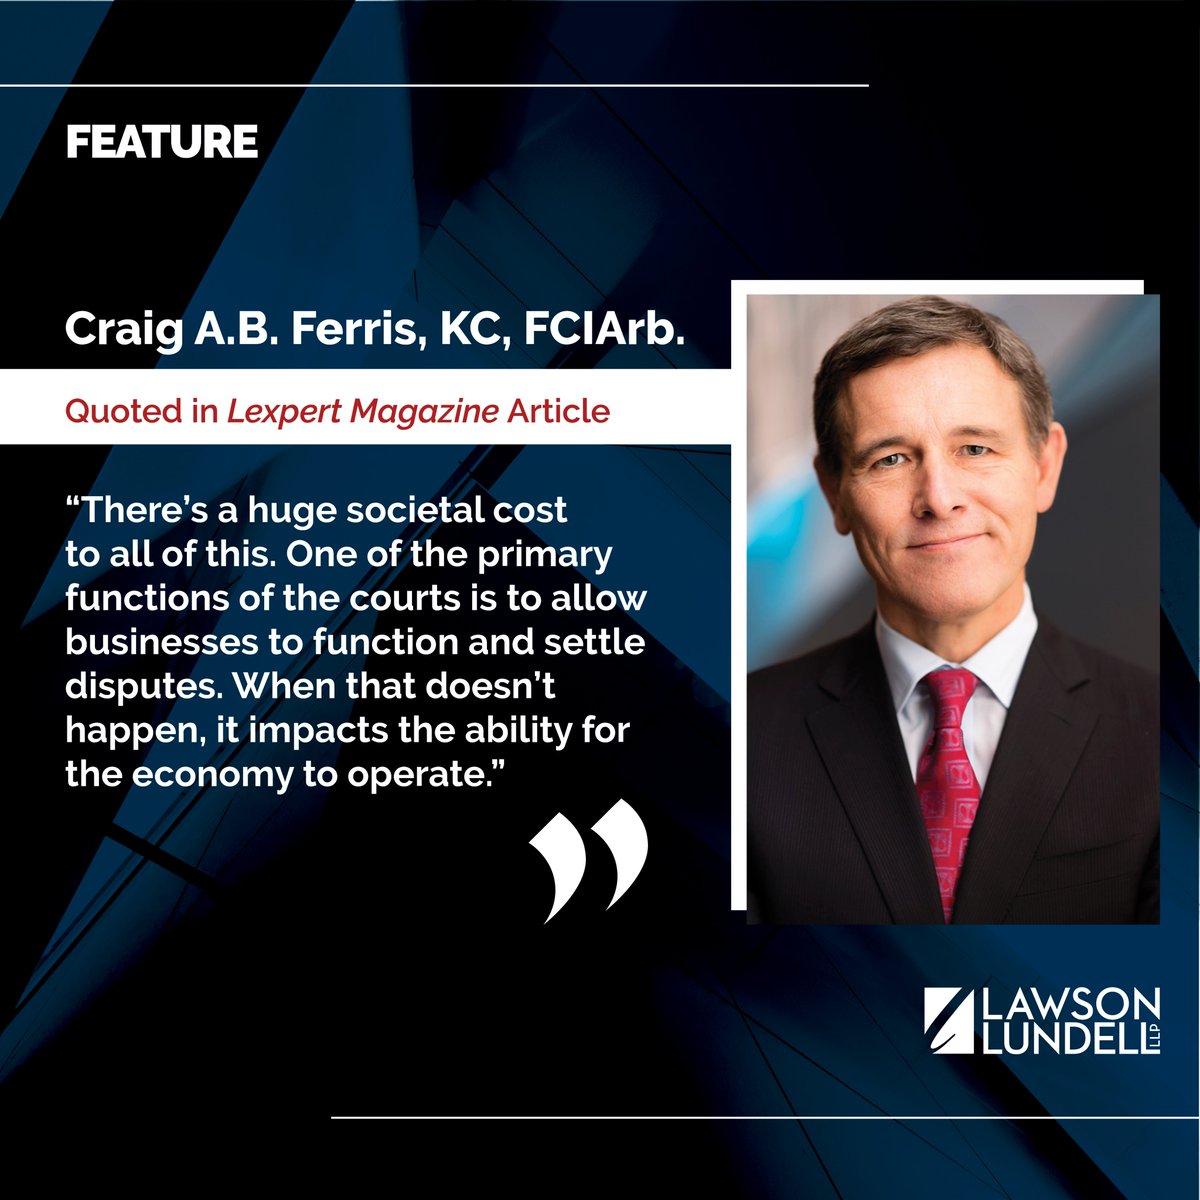 Lawson Lundell lawyer Craig Ferris, KC, FCIArb., was quoted in an article by @Lexpert Magazine on the delays in civil litigation, especially commercial or business disputes, and the need to invest in the justice system to alleviate this problem. lawsonlundell.com/newsroom-news-…